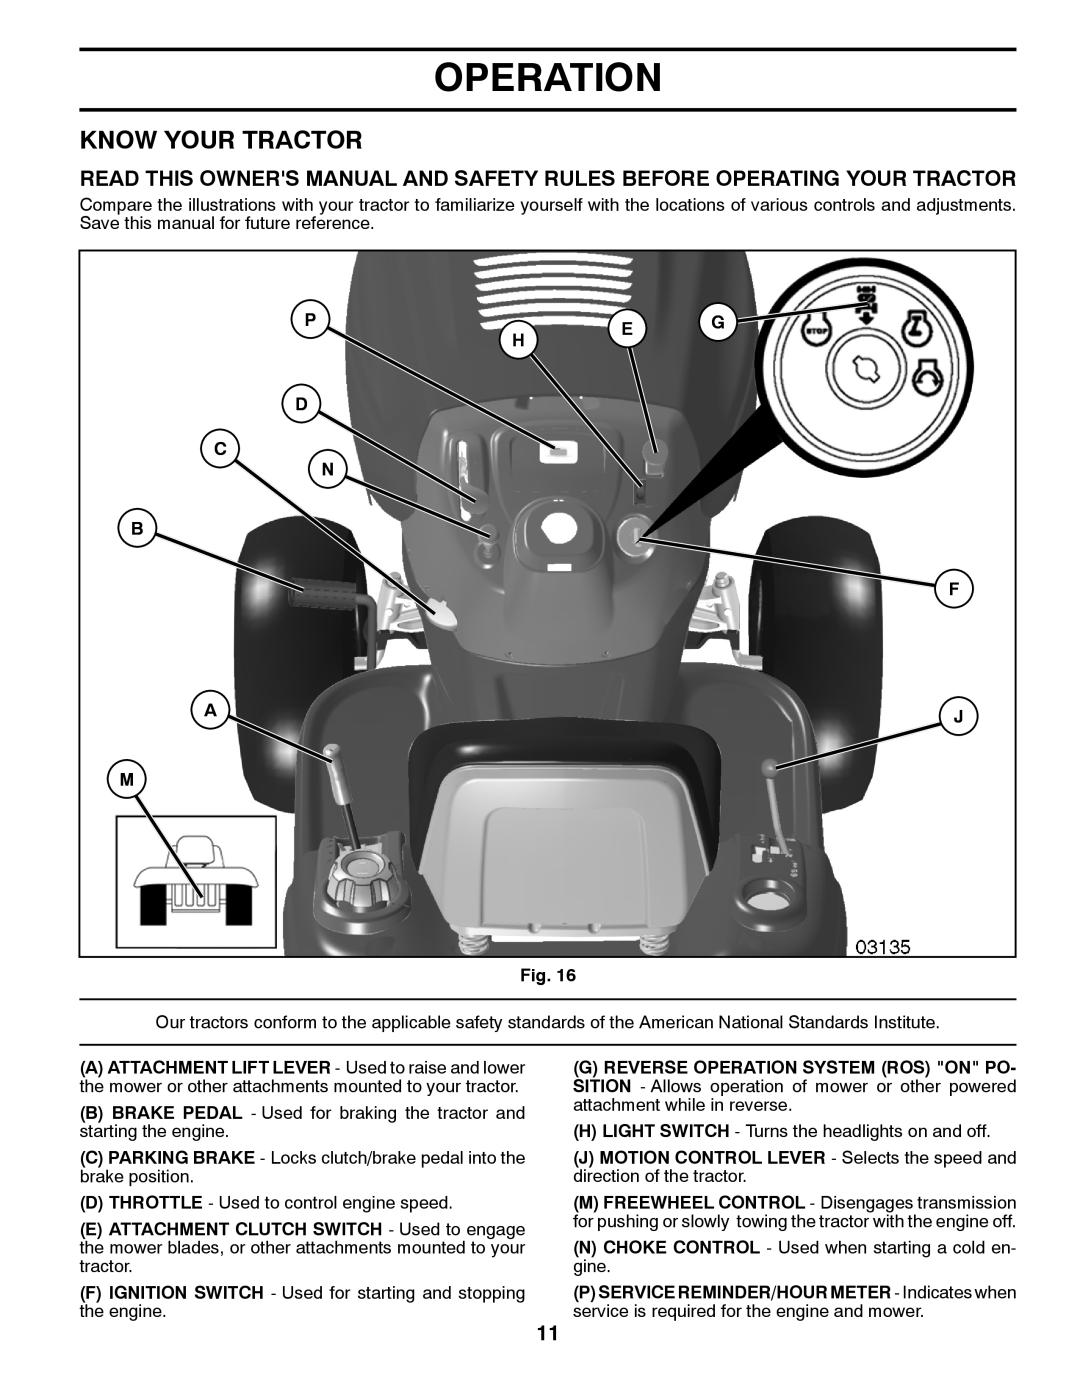 Poulan 96042011101, 436155 manual Know Your Tractor, Operation 